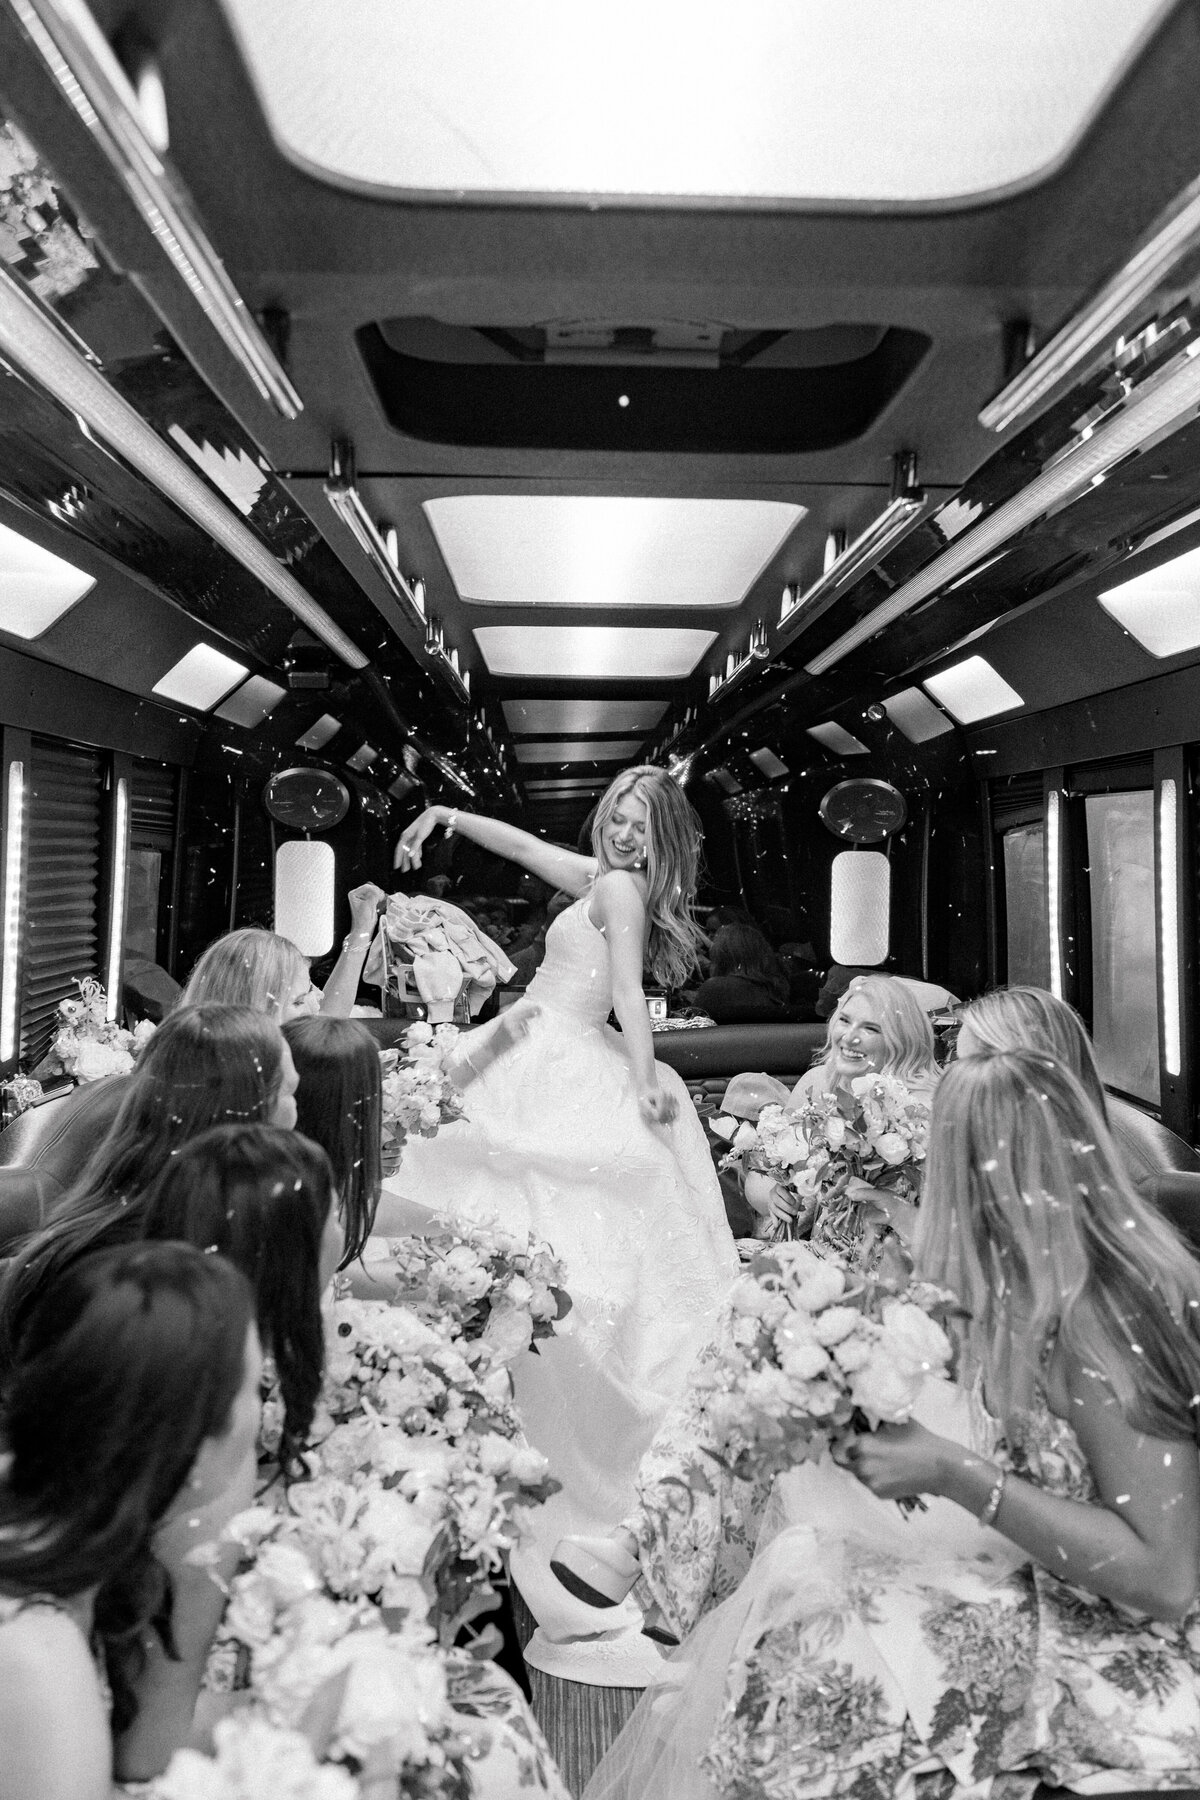 Bride arrives to her wedding on a party bus with all of her friends. Kiawah River Course wedding. Kailee DiMeglio Photography. Black and white candid wedding photographer.